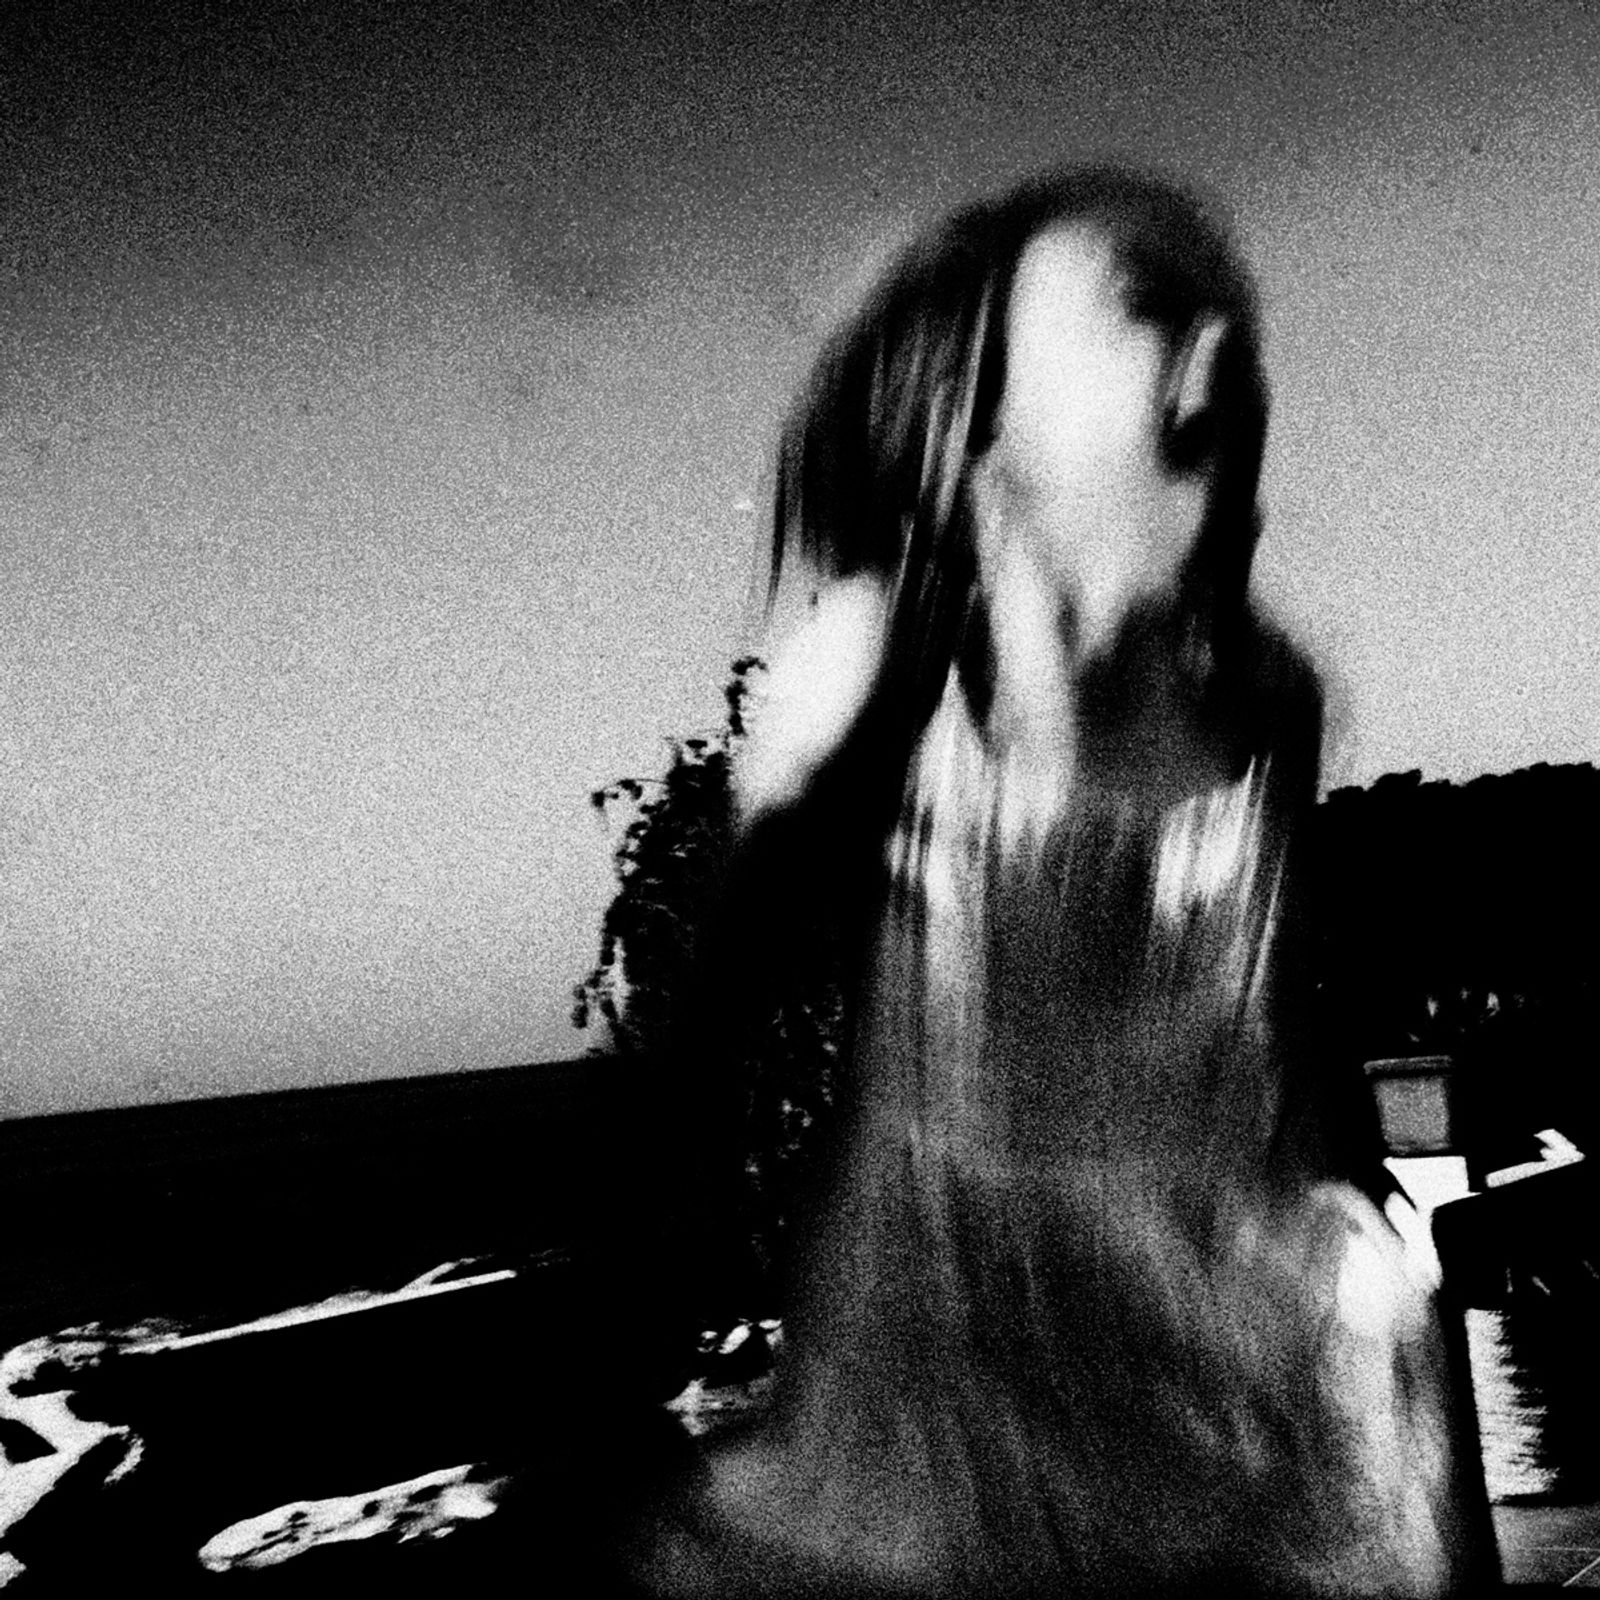 © Nino Cannizzaro - Image from the HUM photography project